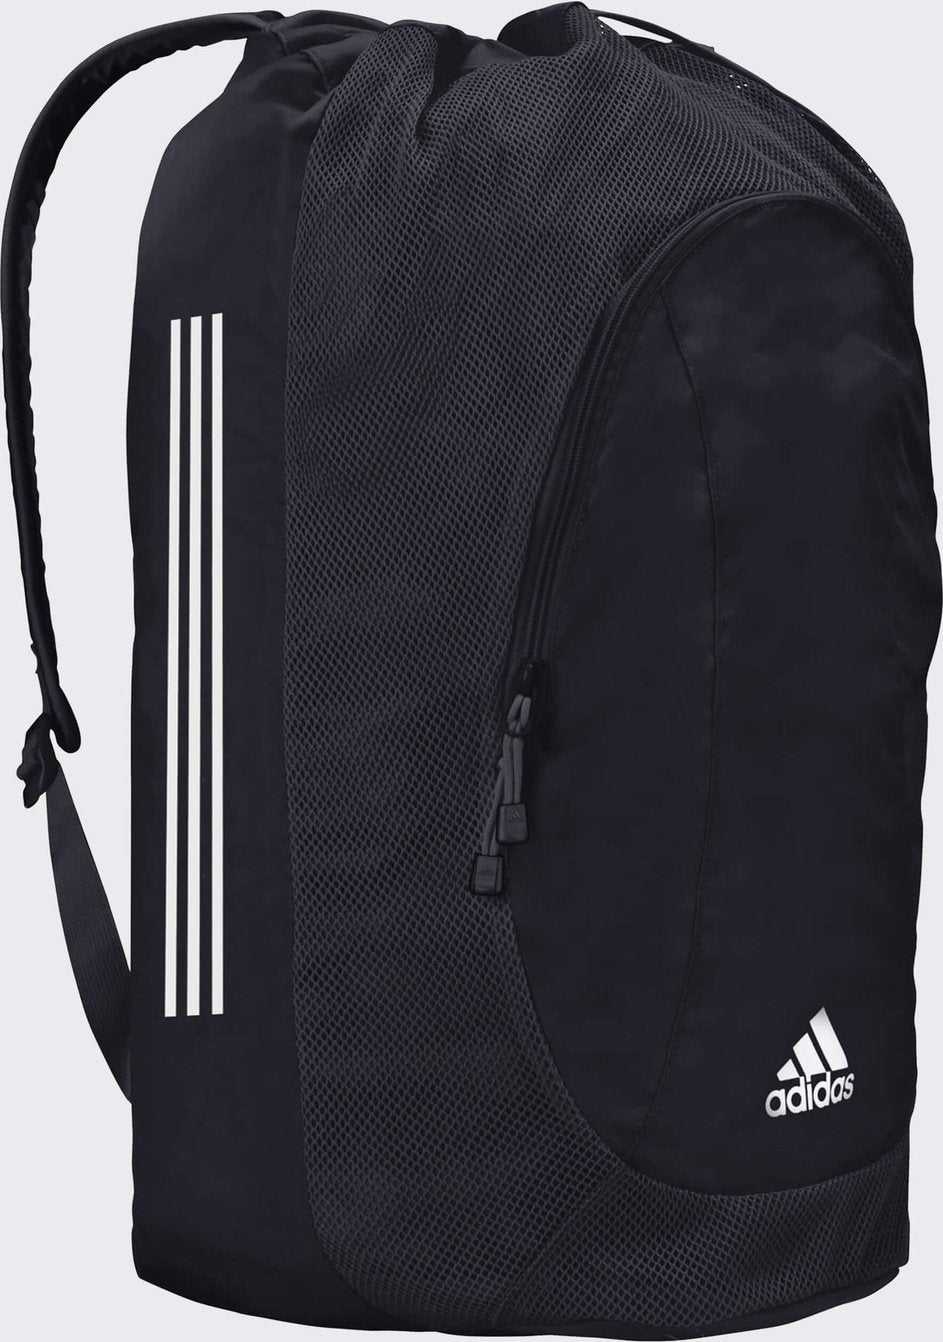 Adidas aA5147205 Wrestling Gear Bag - Black White - HIT a Double